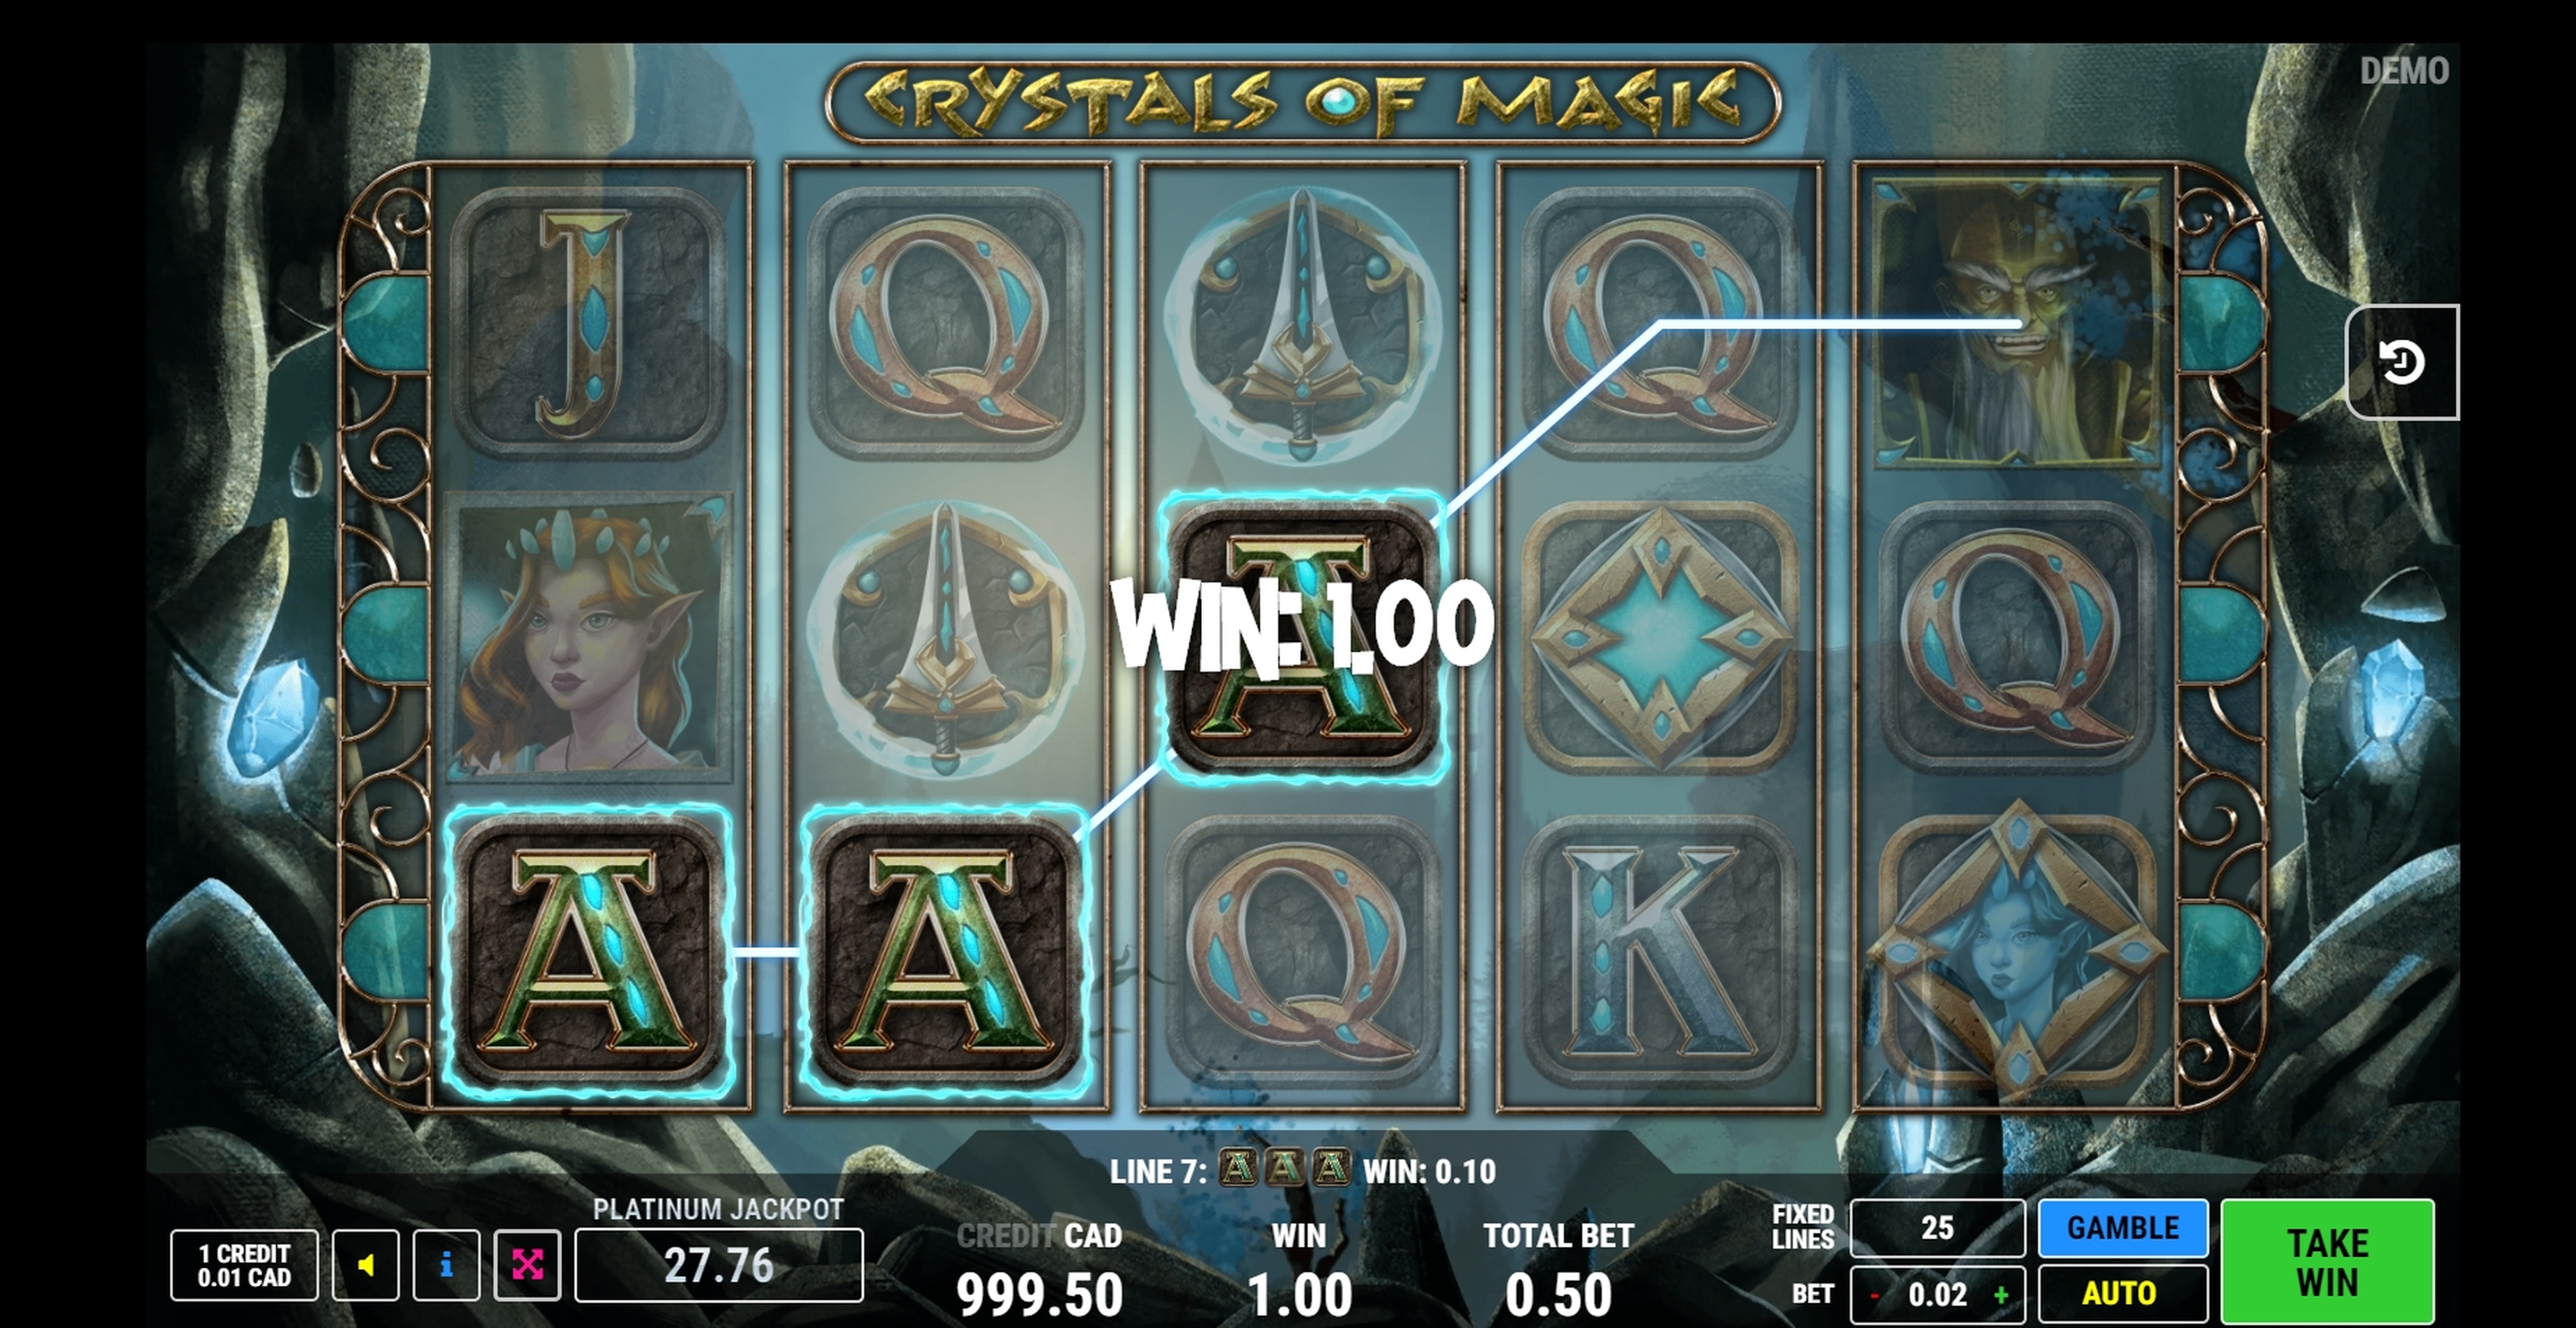 Win Money in Crystals of Magic Free Slot Game by Fazi Gaming